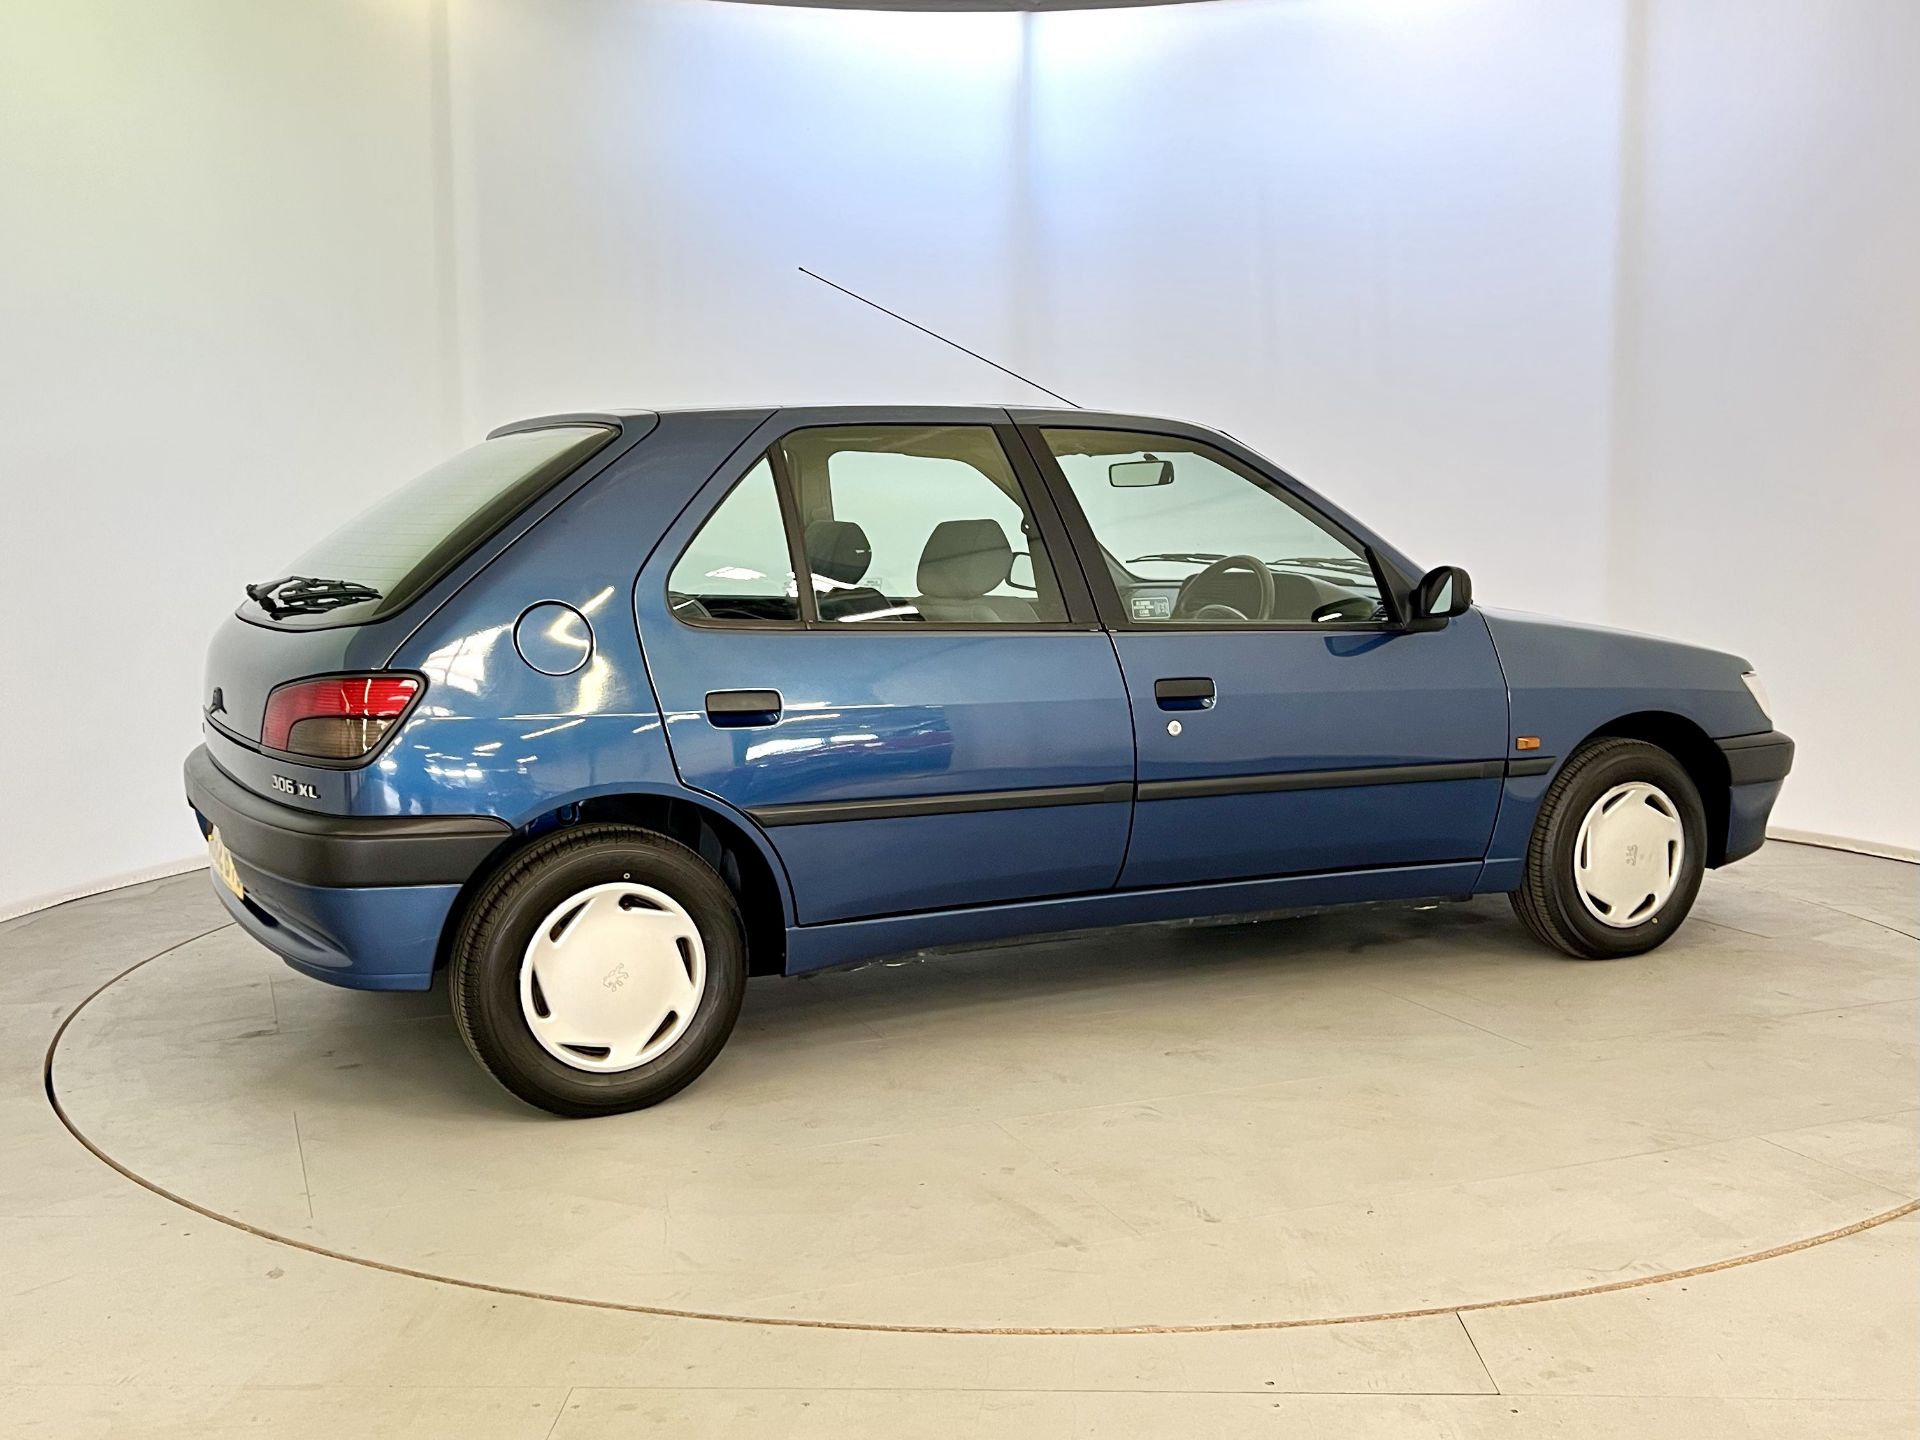 Peugeot 306 - Image 10 of 36